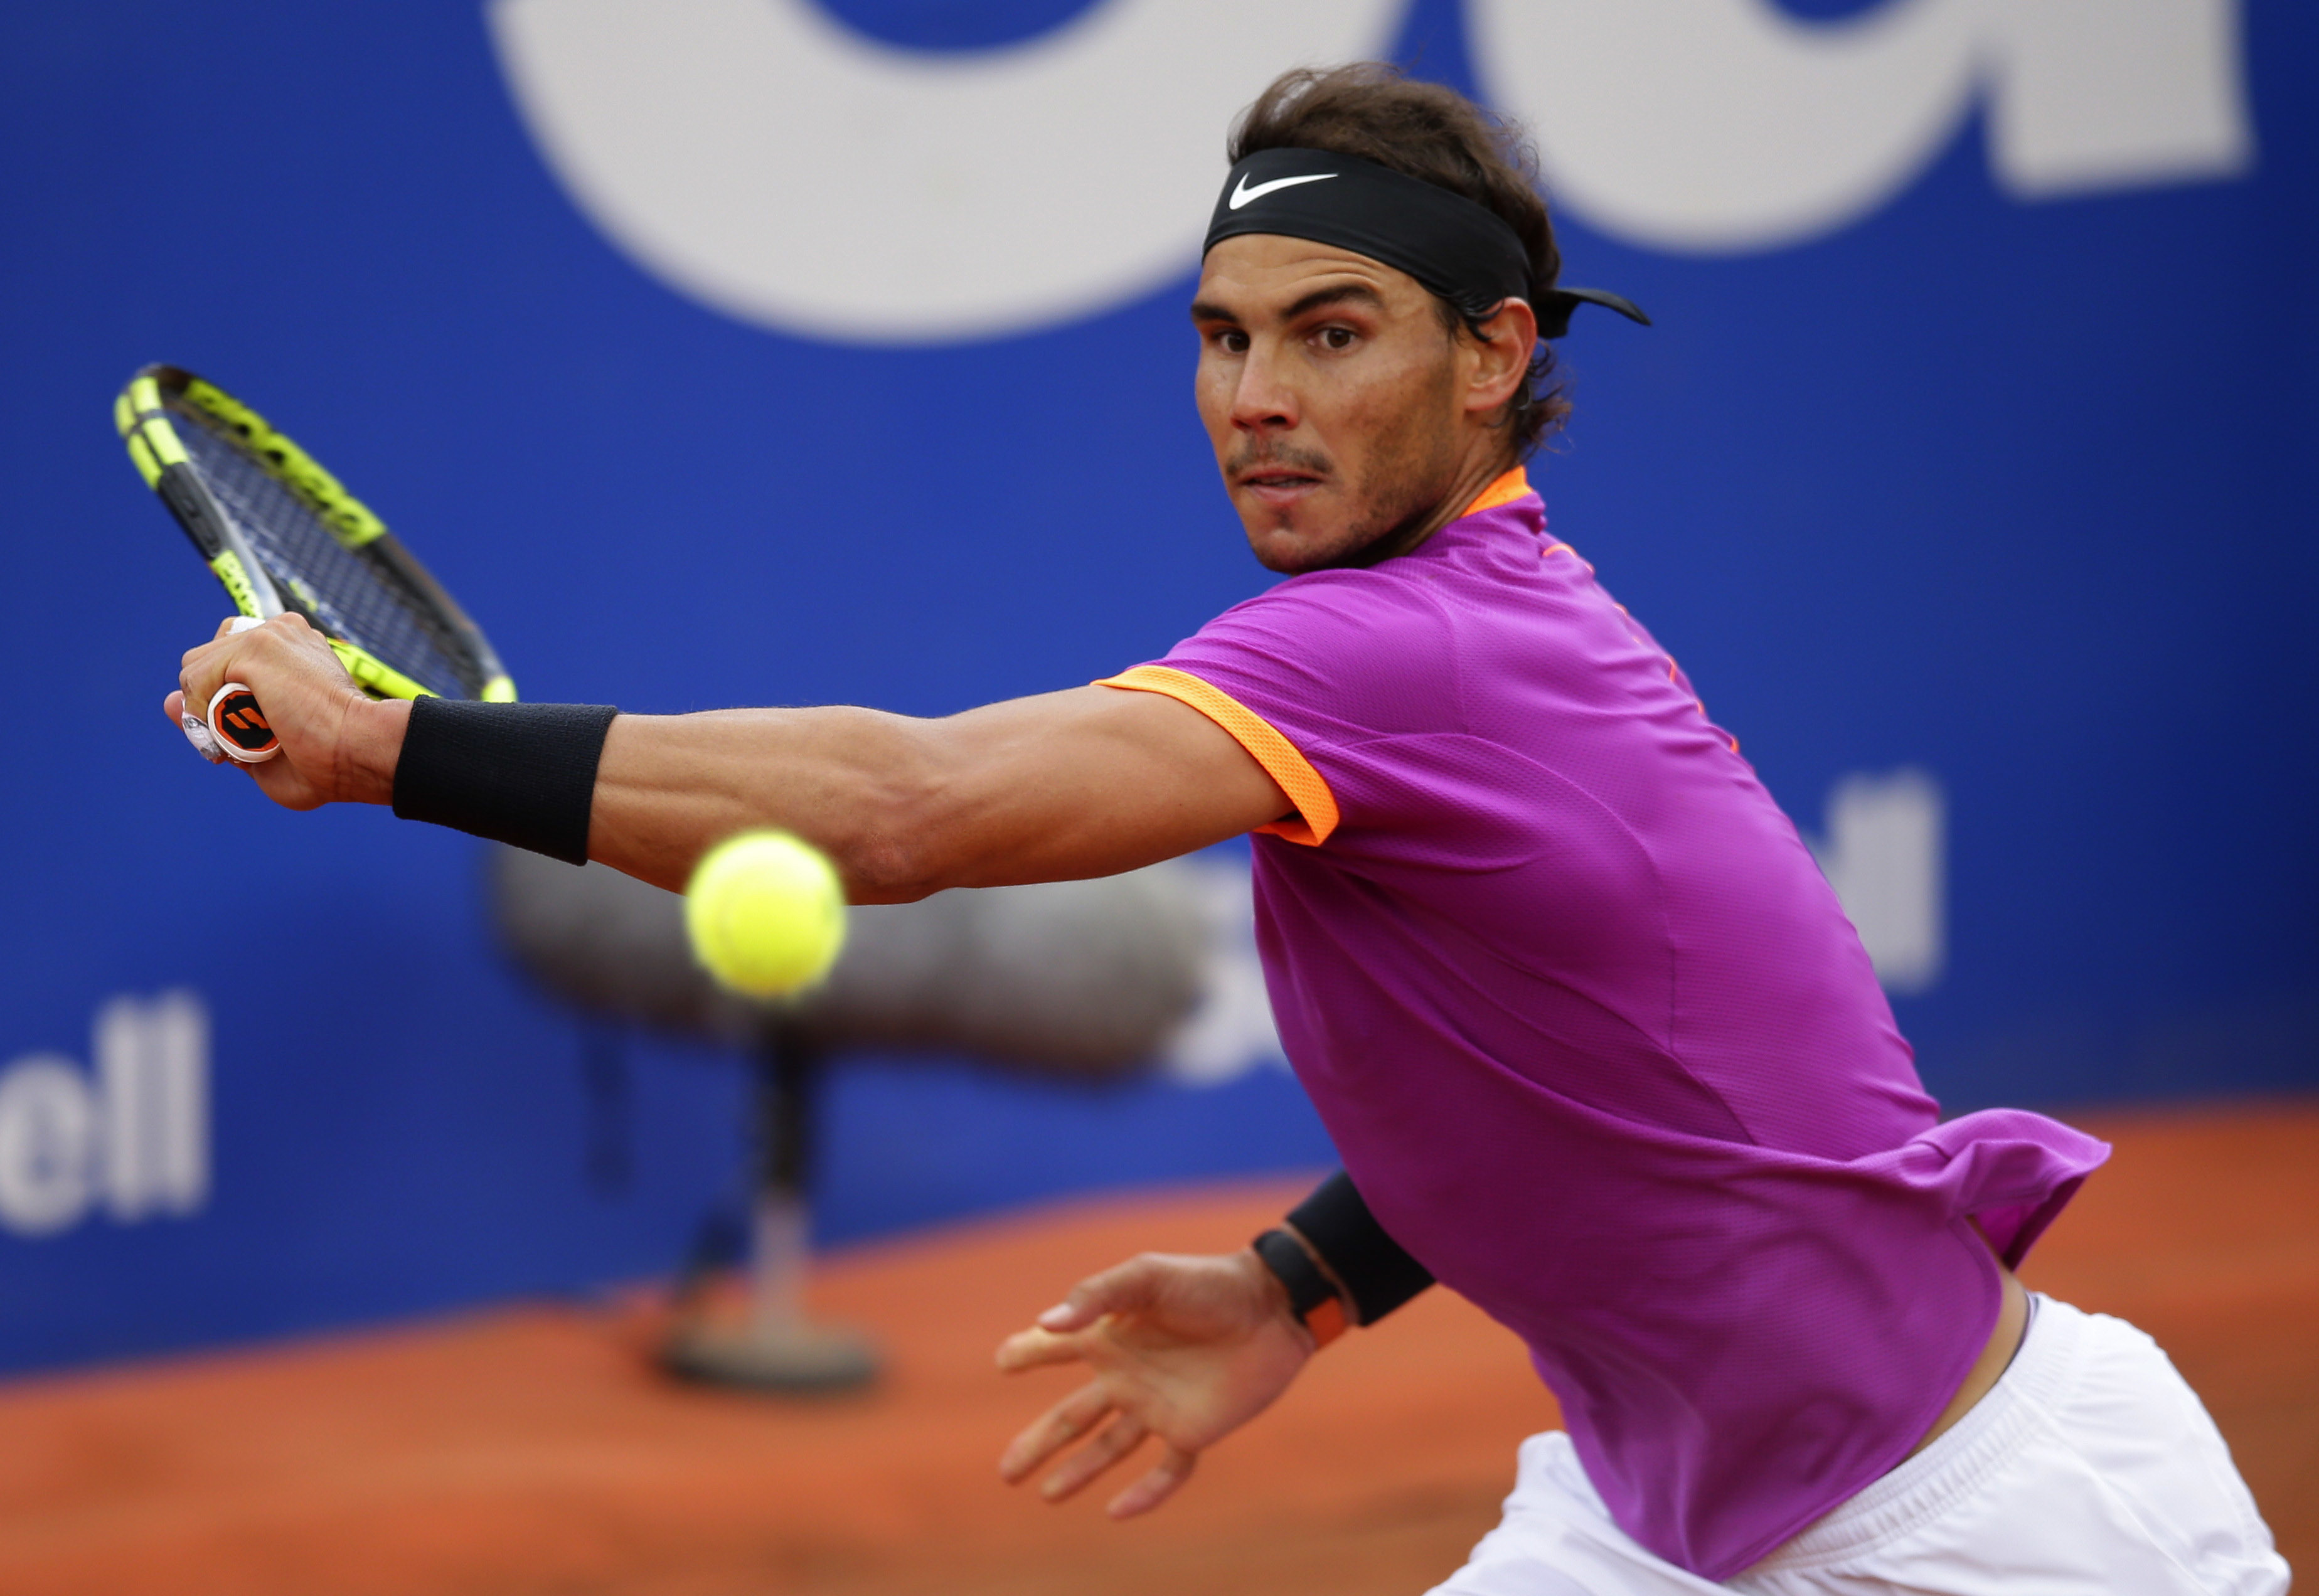 Rafael Nadal's debut in Madrid delayed because of ear infection